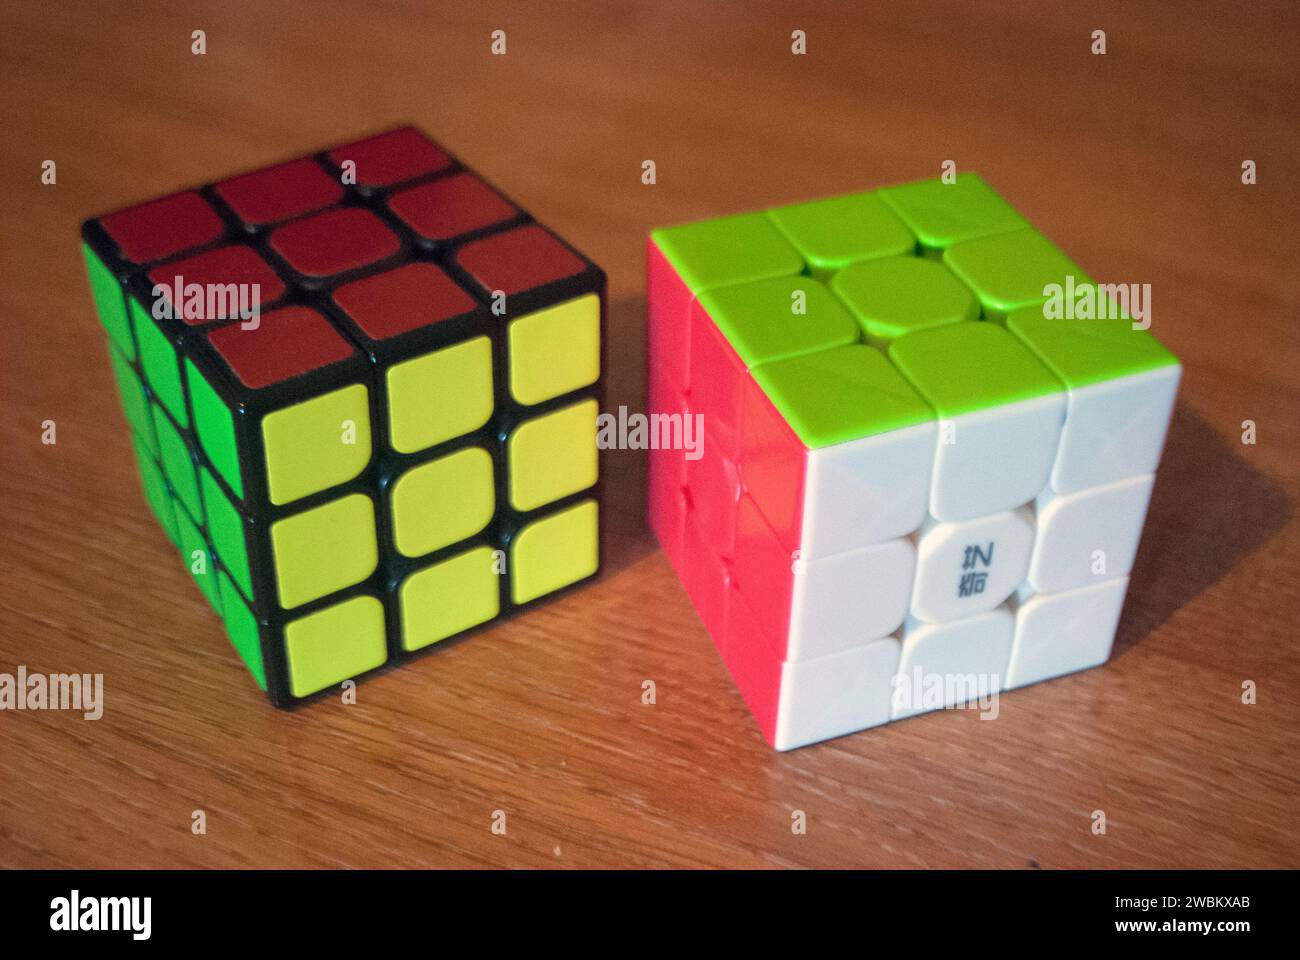 Two rubik's cubes on a desk Stock Photo